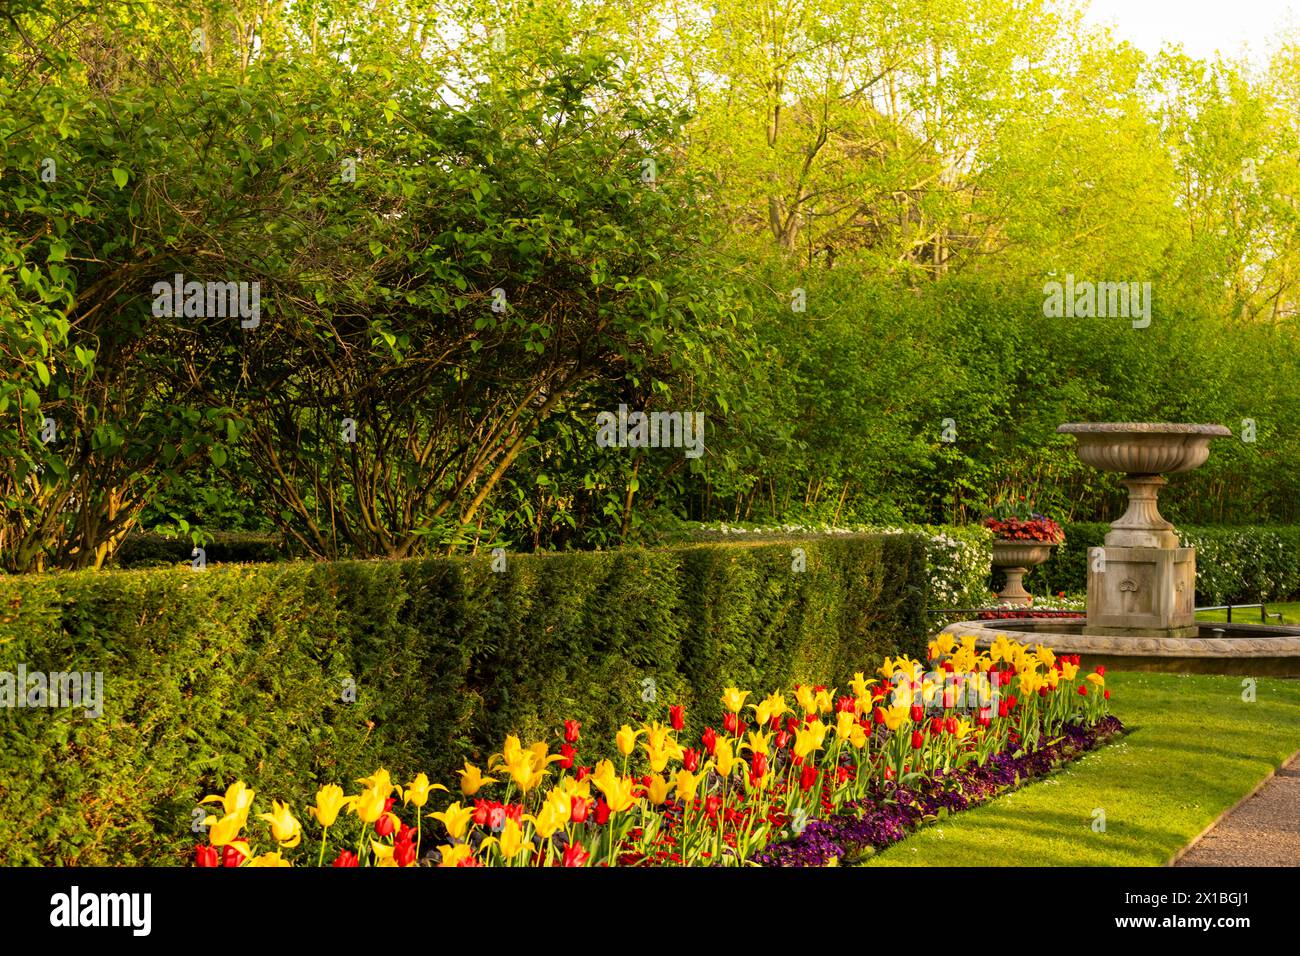 A display of red and yellow Tulipa - tulips in Avenue Gardens in Regent's Park, London Stock Photo